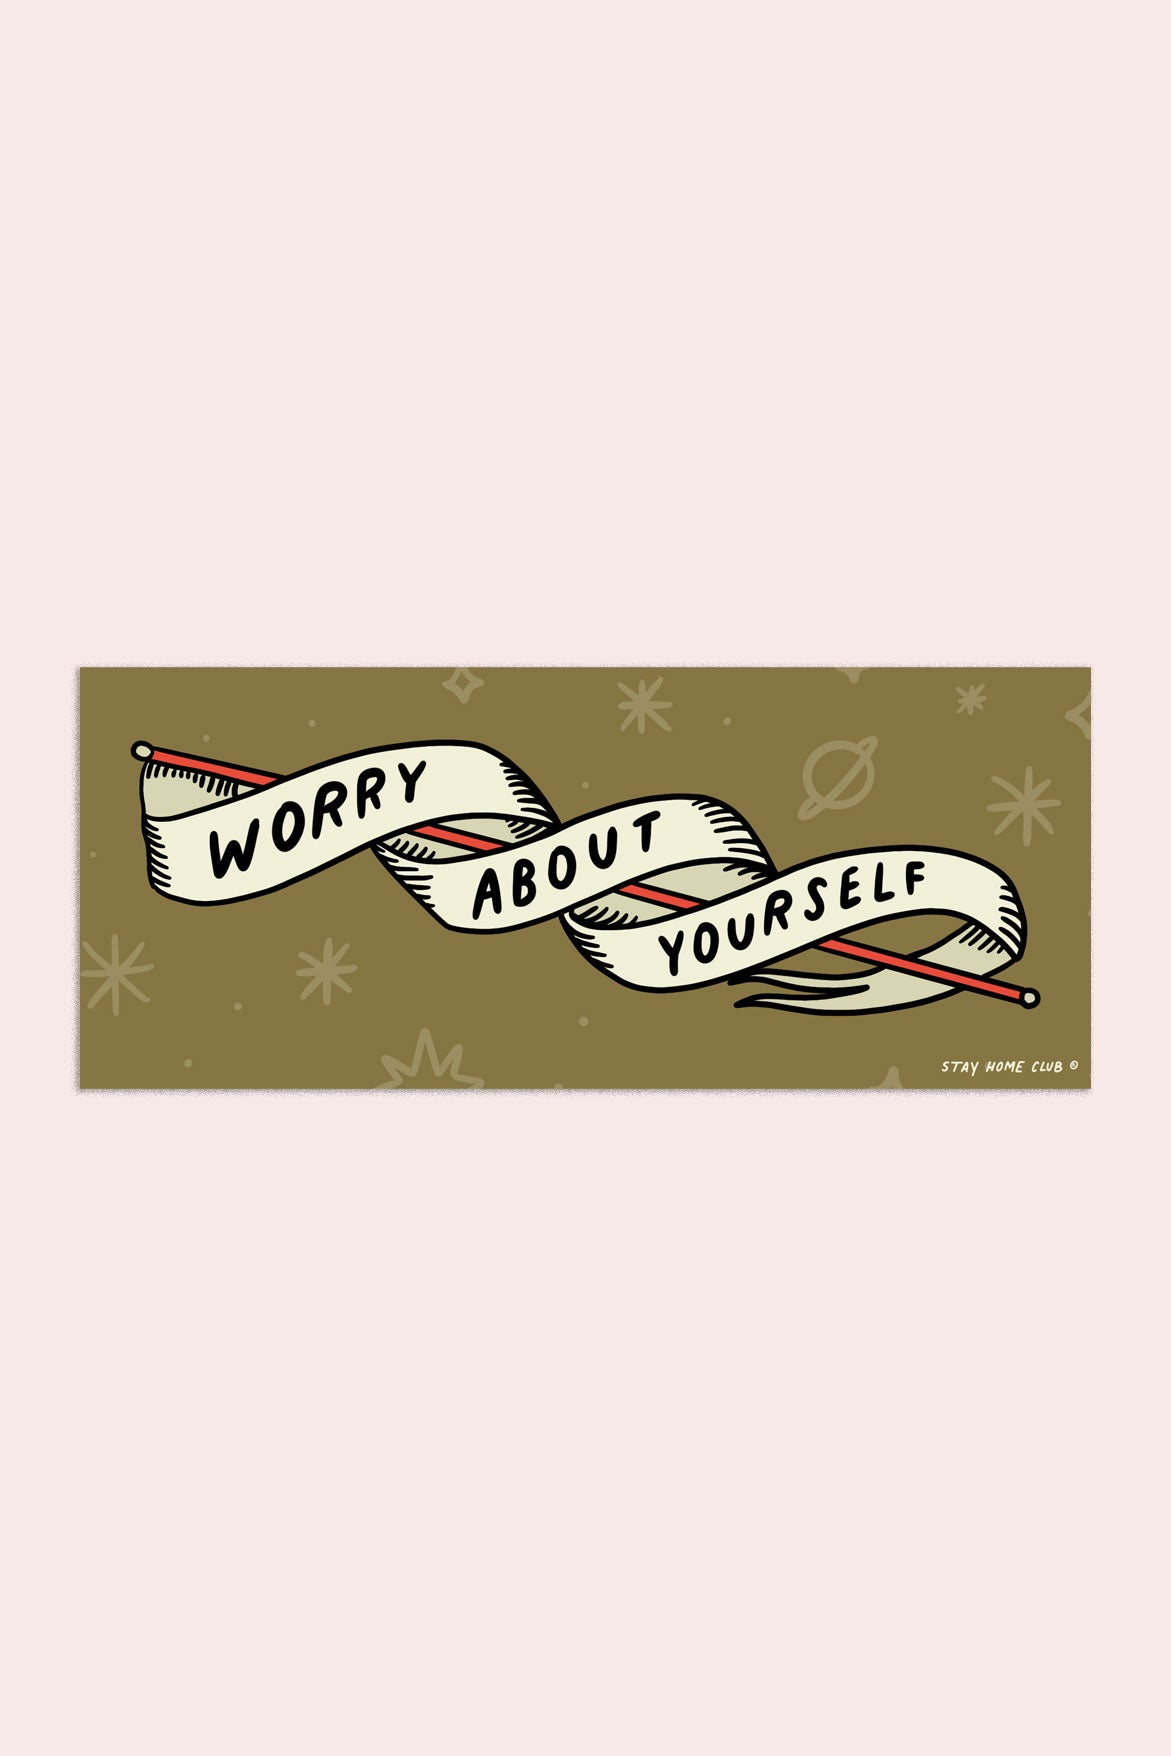 Autocollant pour Auto "Worry About Yourself"